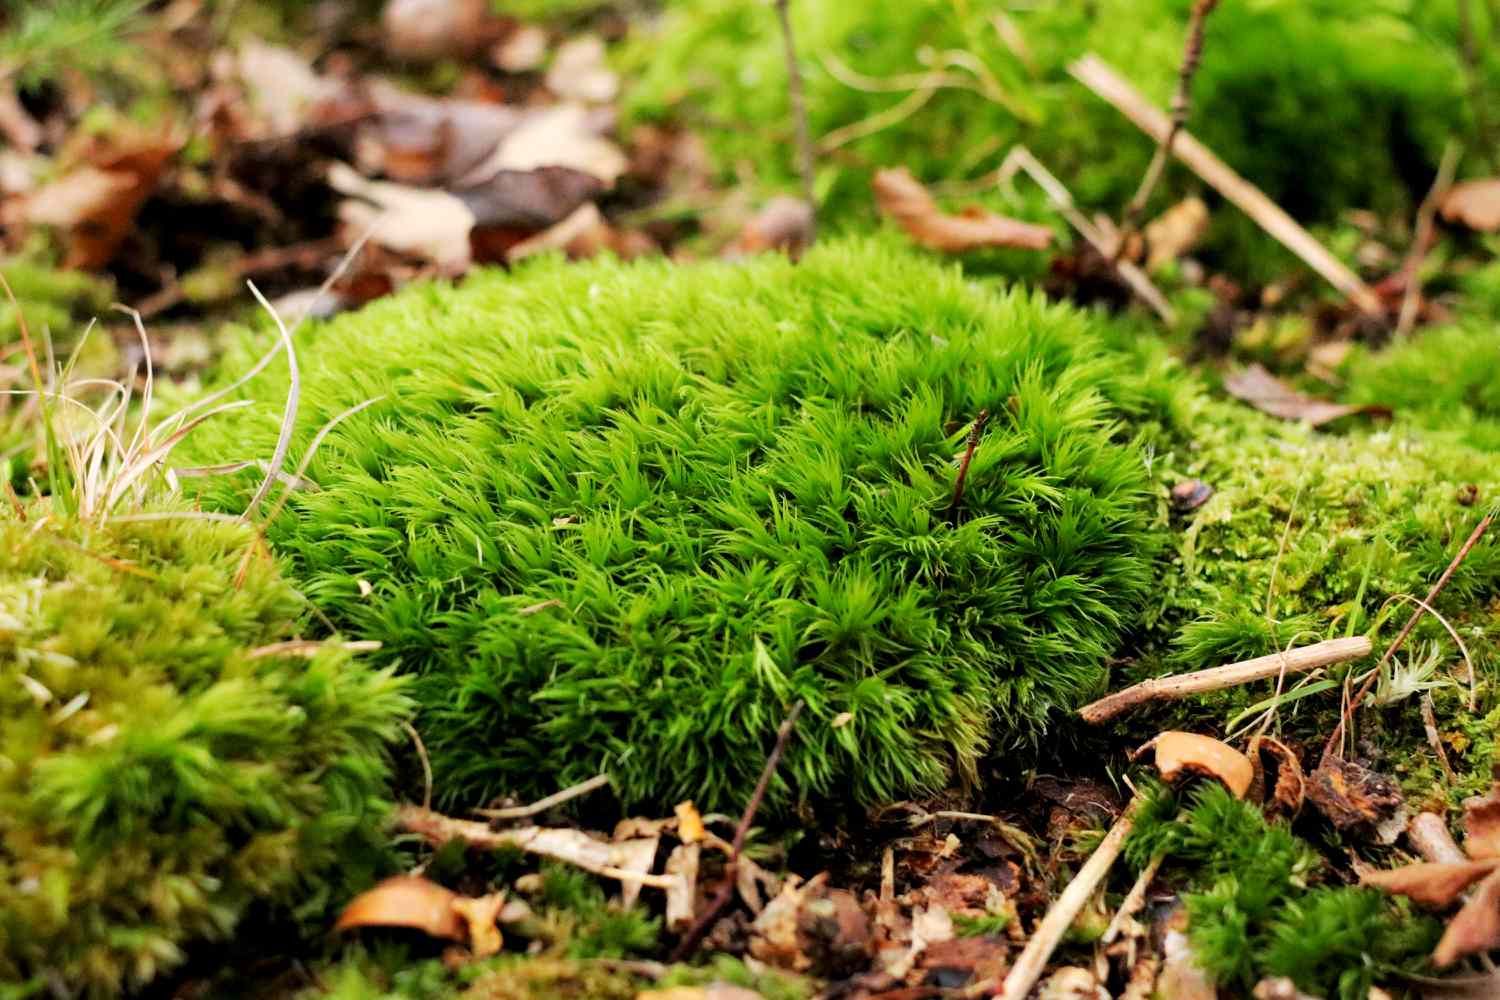 Patch of moss growing in lawn with surrounding mulch